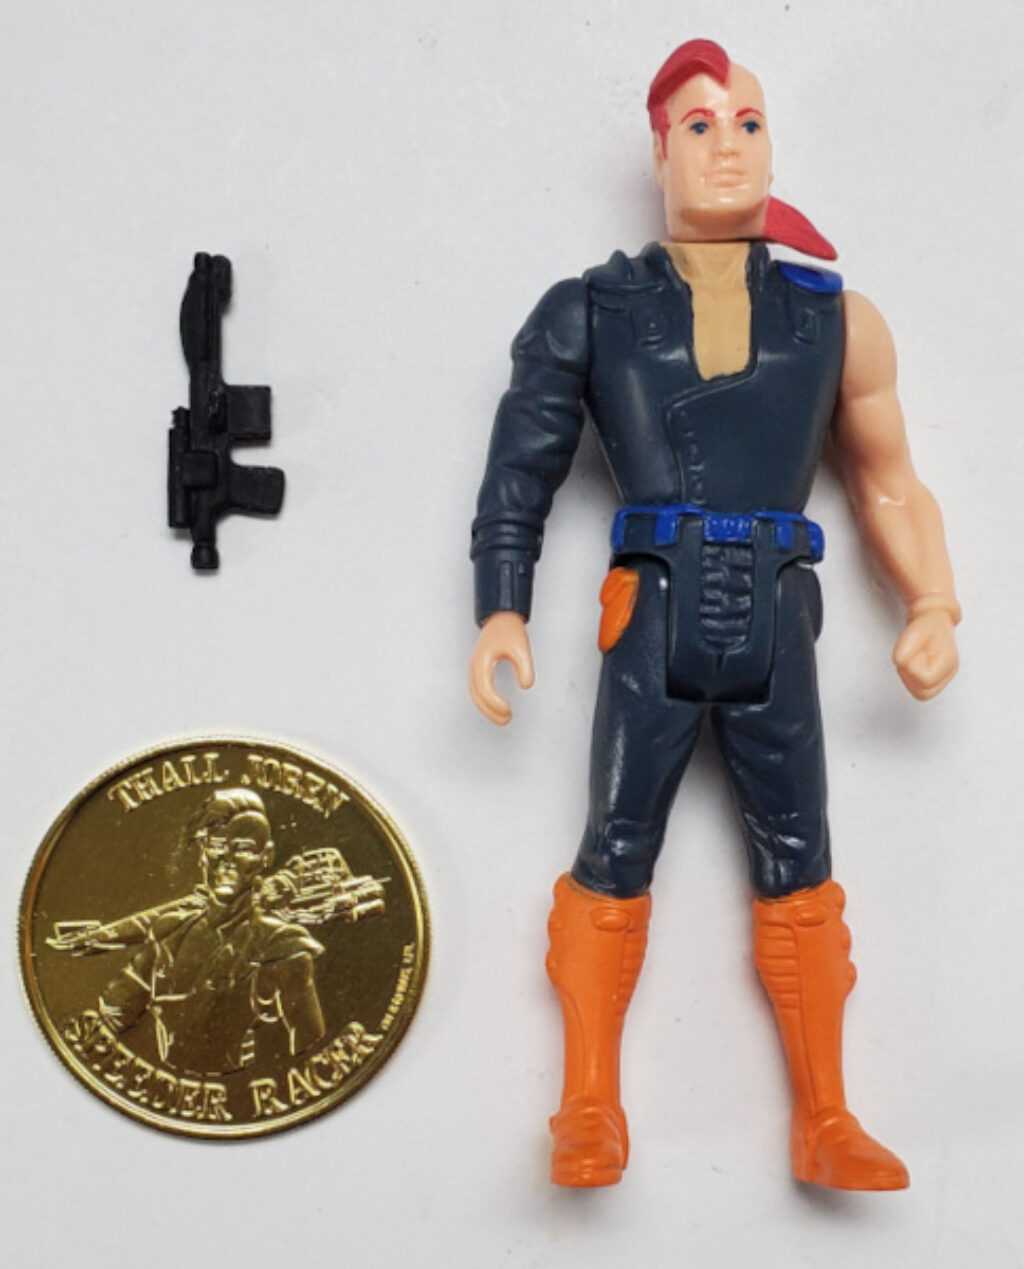 NM 1985 Kenner Star Wars Droids Thall Joben with Coin and Blaster 1